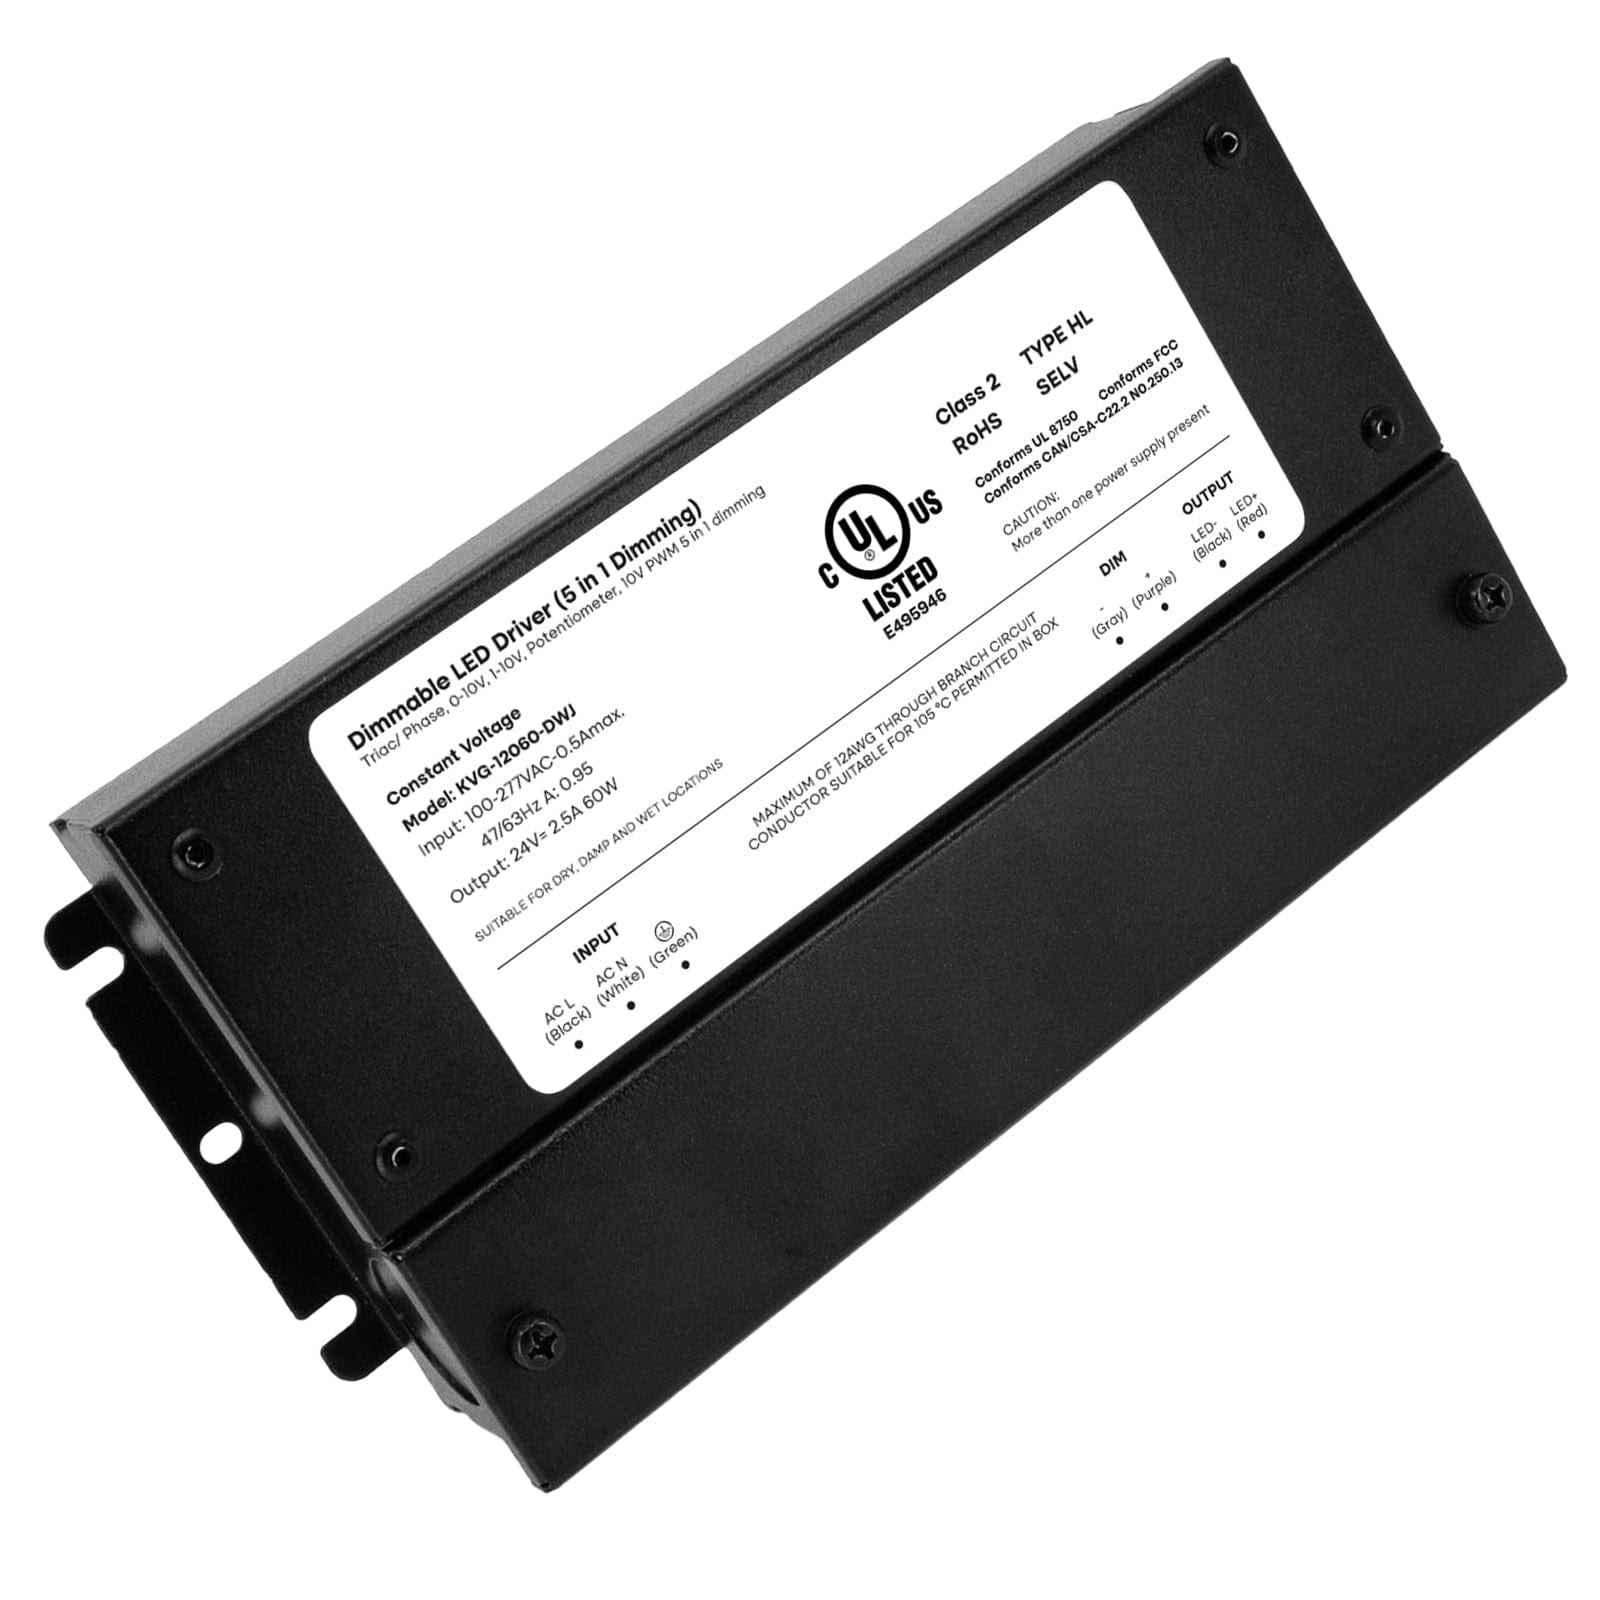 60W LED Dimmable Driver (Electronic, UL Listed) - 24 Volt